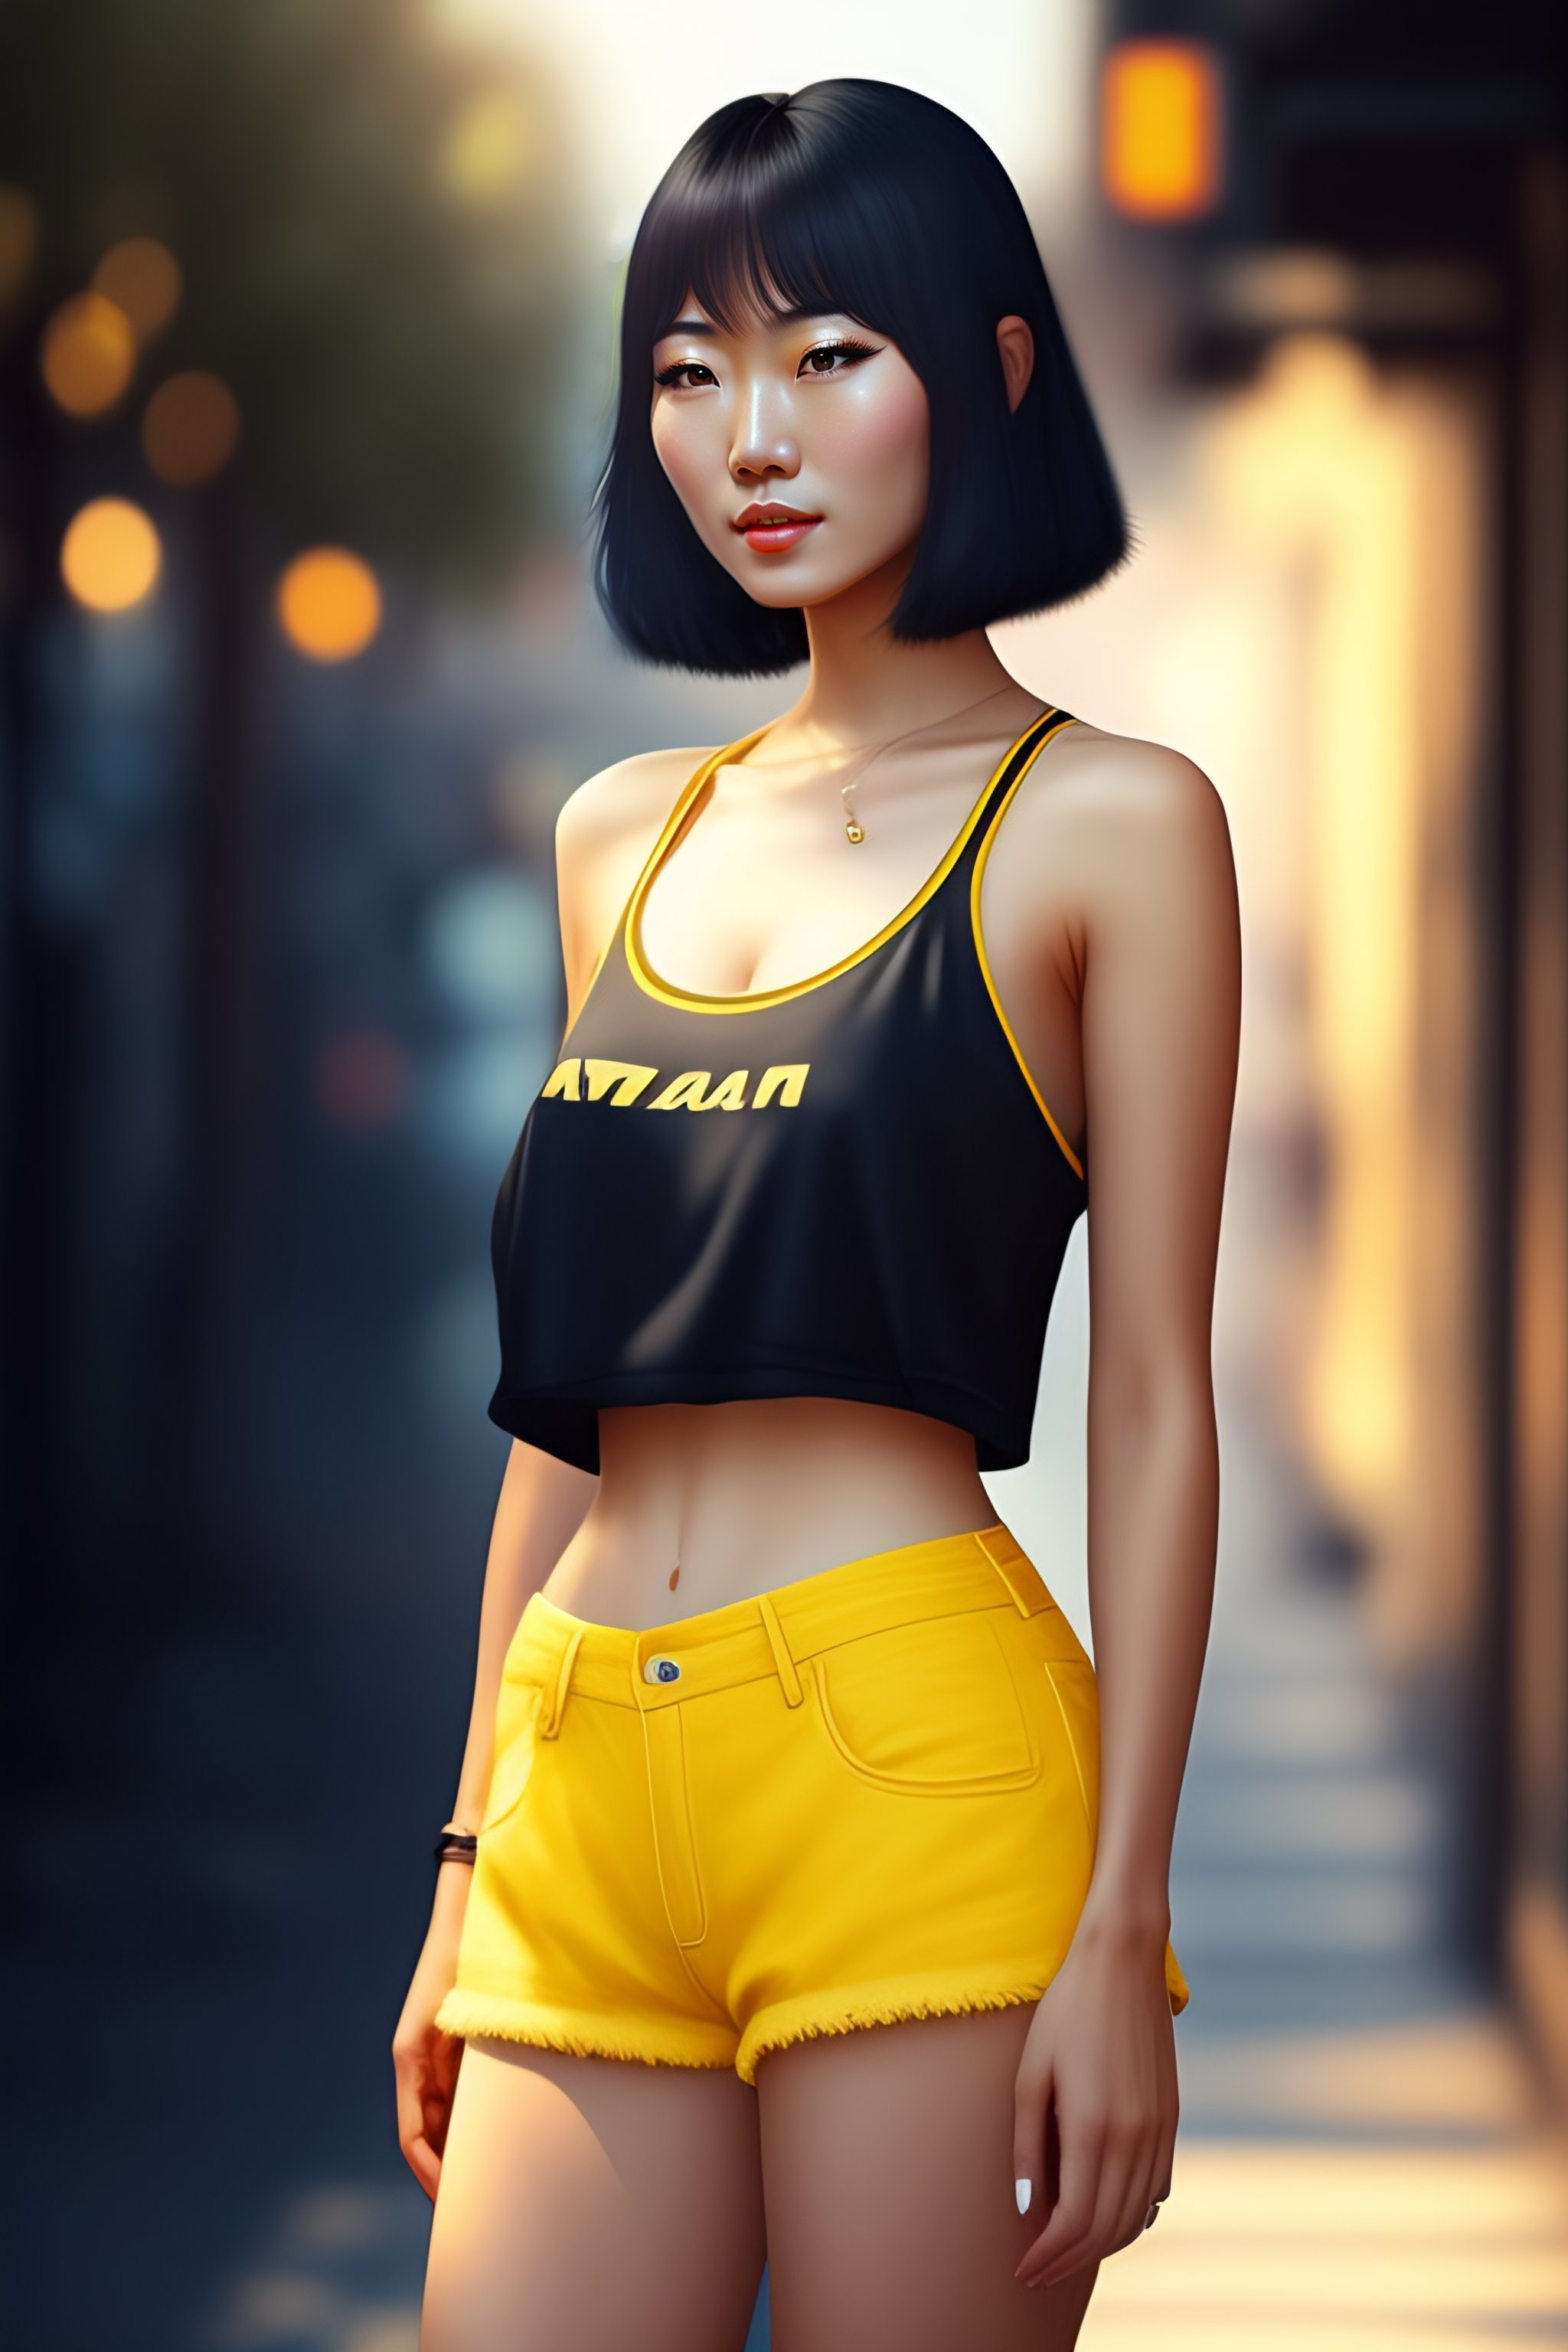 Lexica - A beautiful Japanese woman with short black hair, she's wearing a  yellow tank-top and blue jean shorts. She's holding a video camera. HD  dig